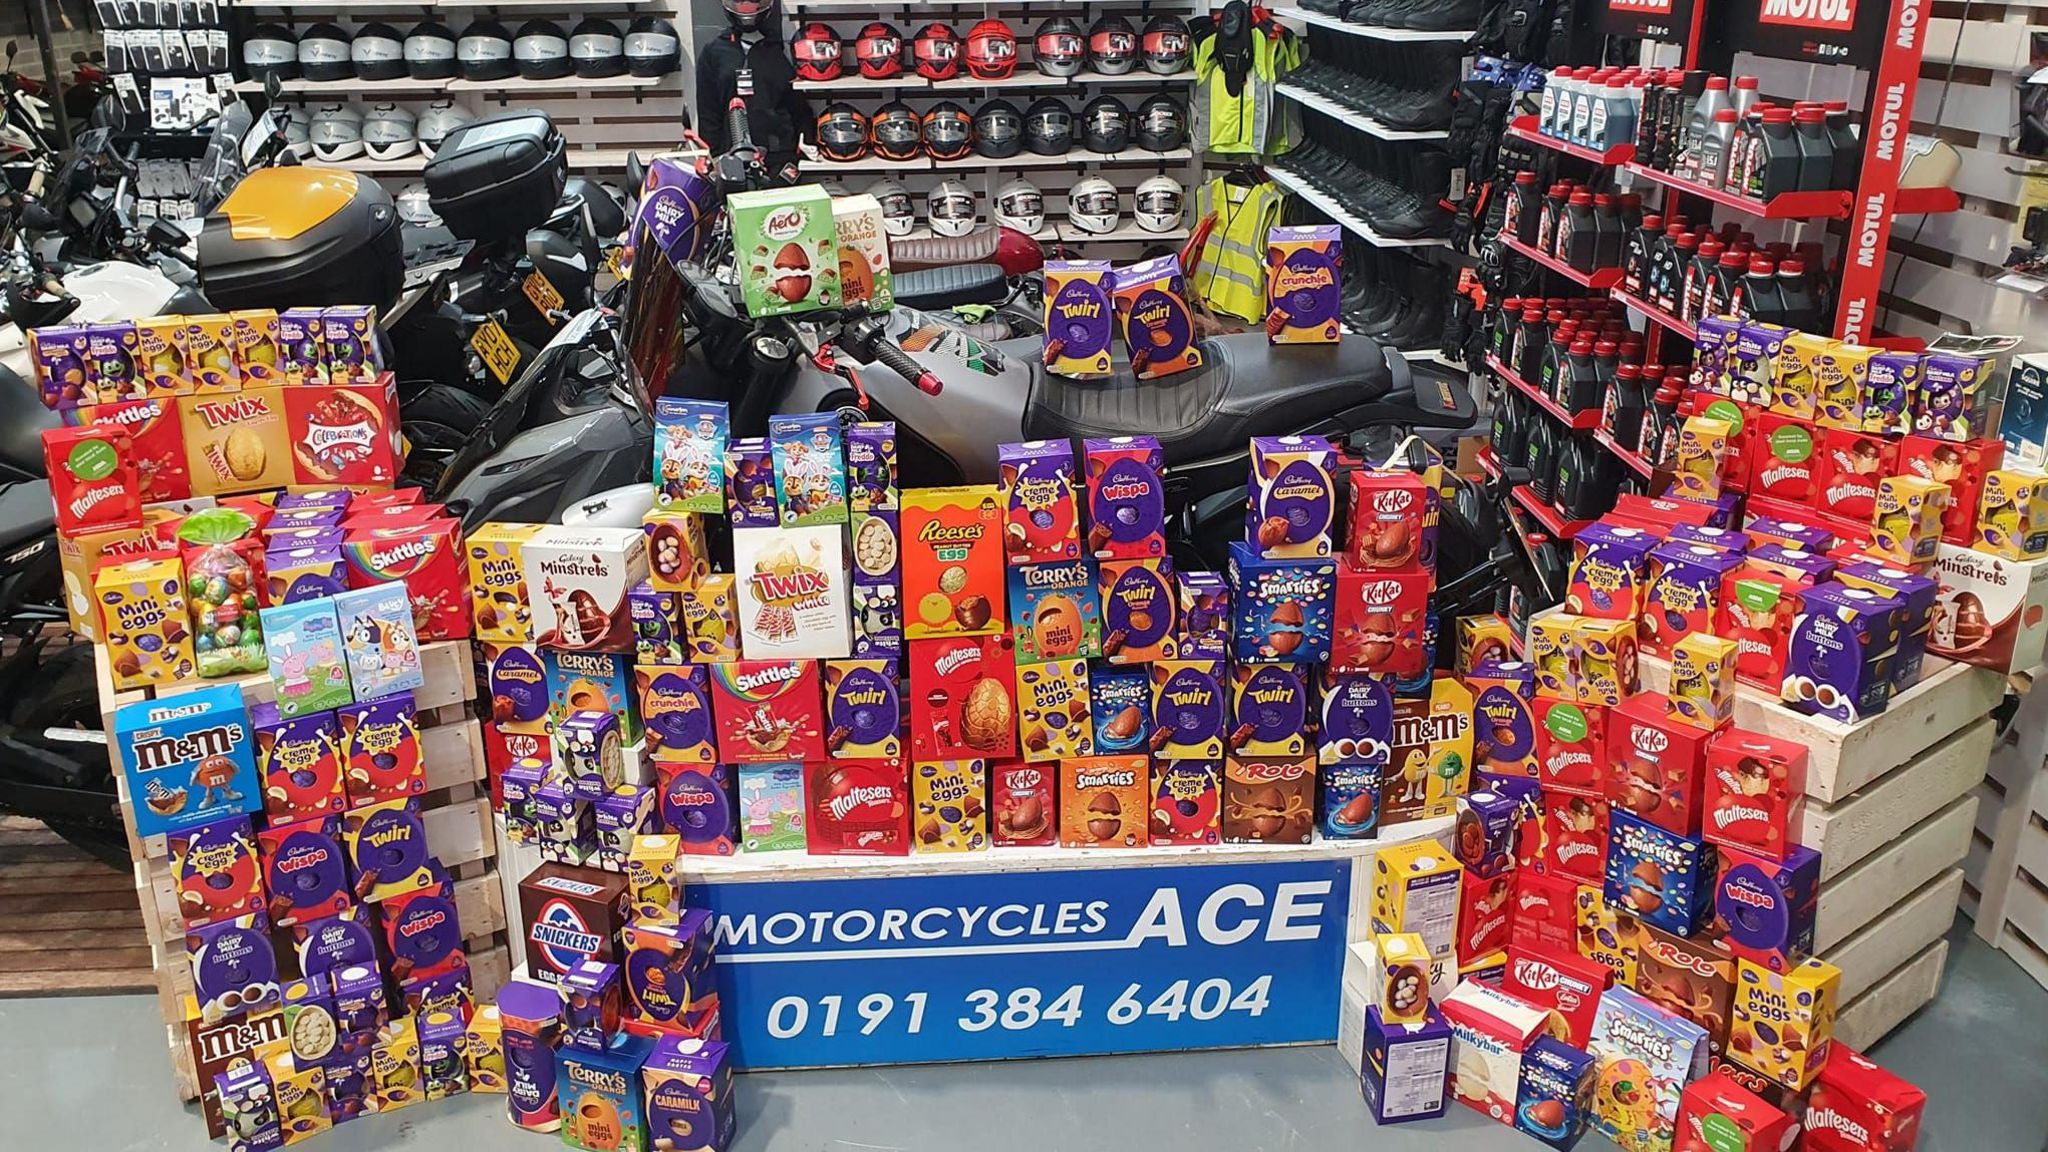 Donated Easter eggs at a motorcycle store